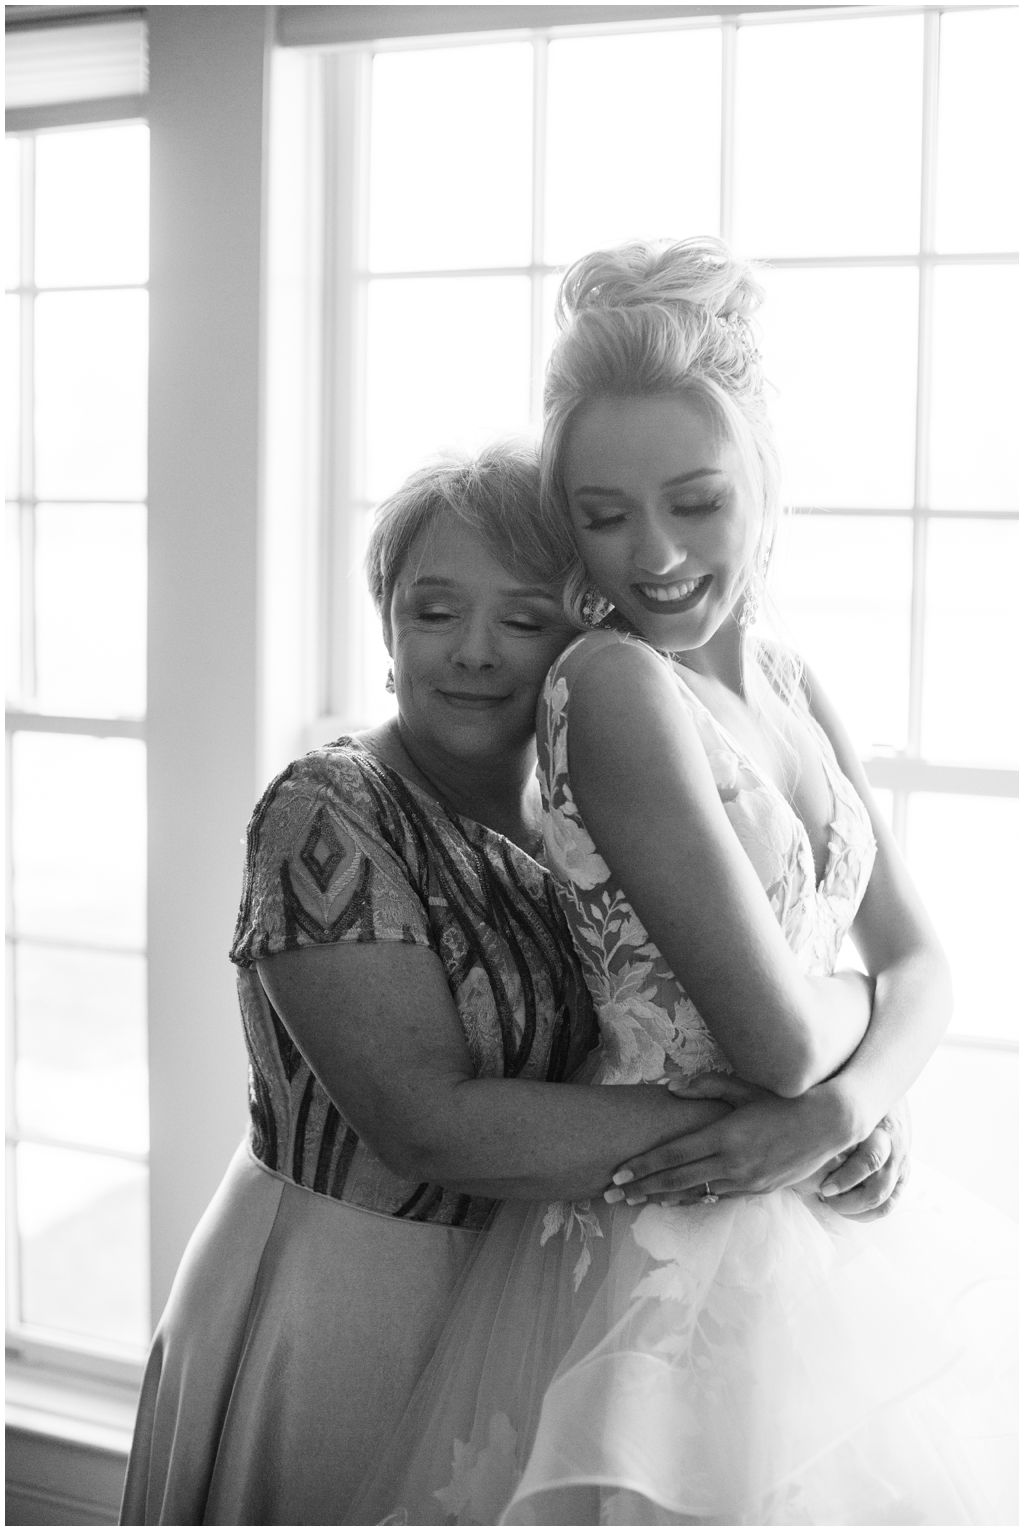 Emily Ann Roberts and mom share a hug after she gets into her wedding gown.